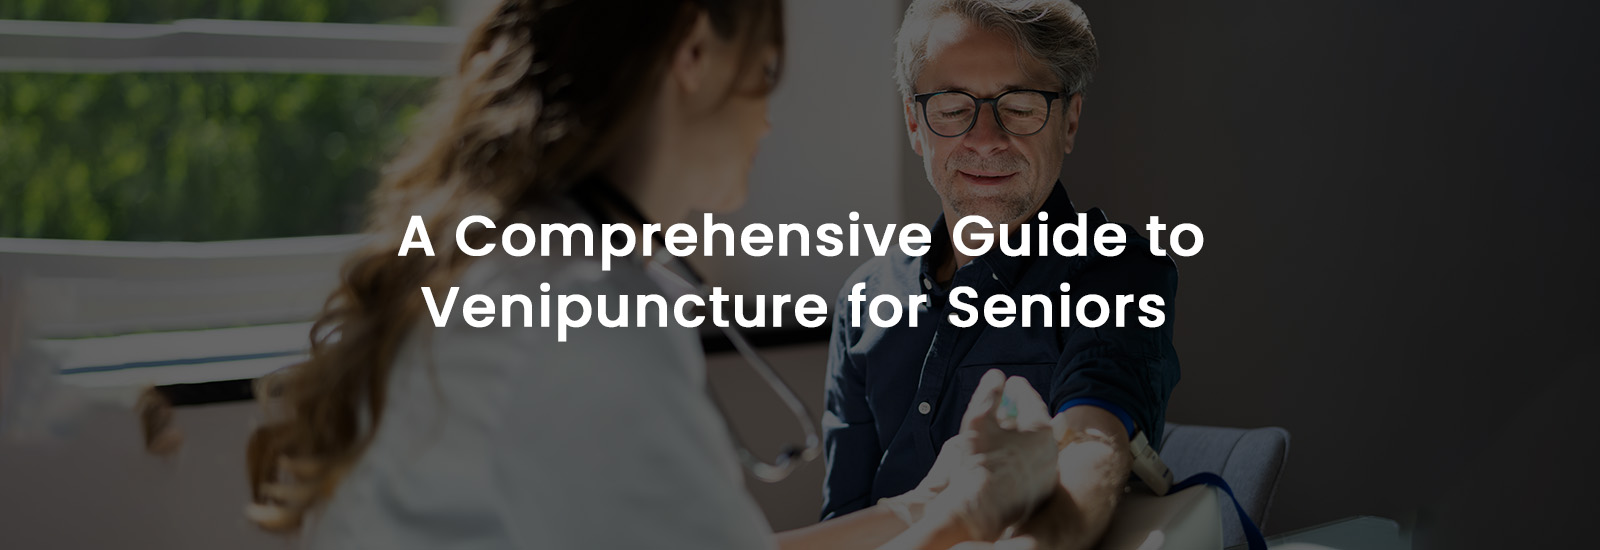 A Comprehensive Guide to Venipuncture for Seniors | Banner Image